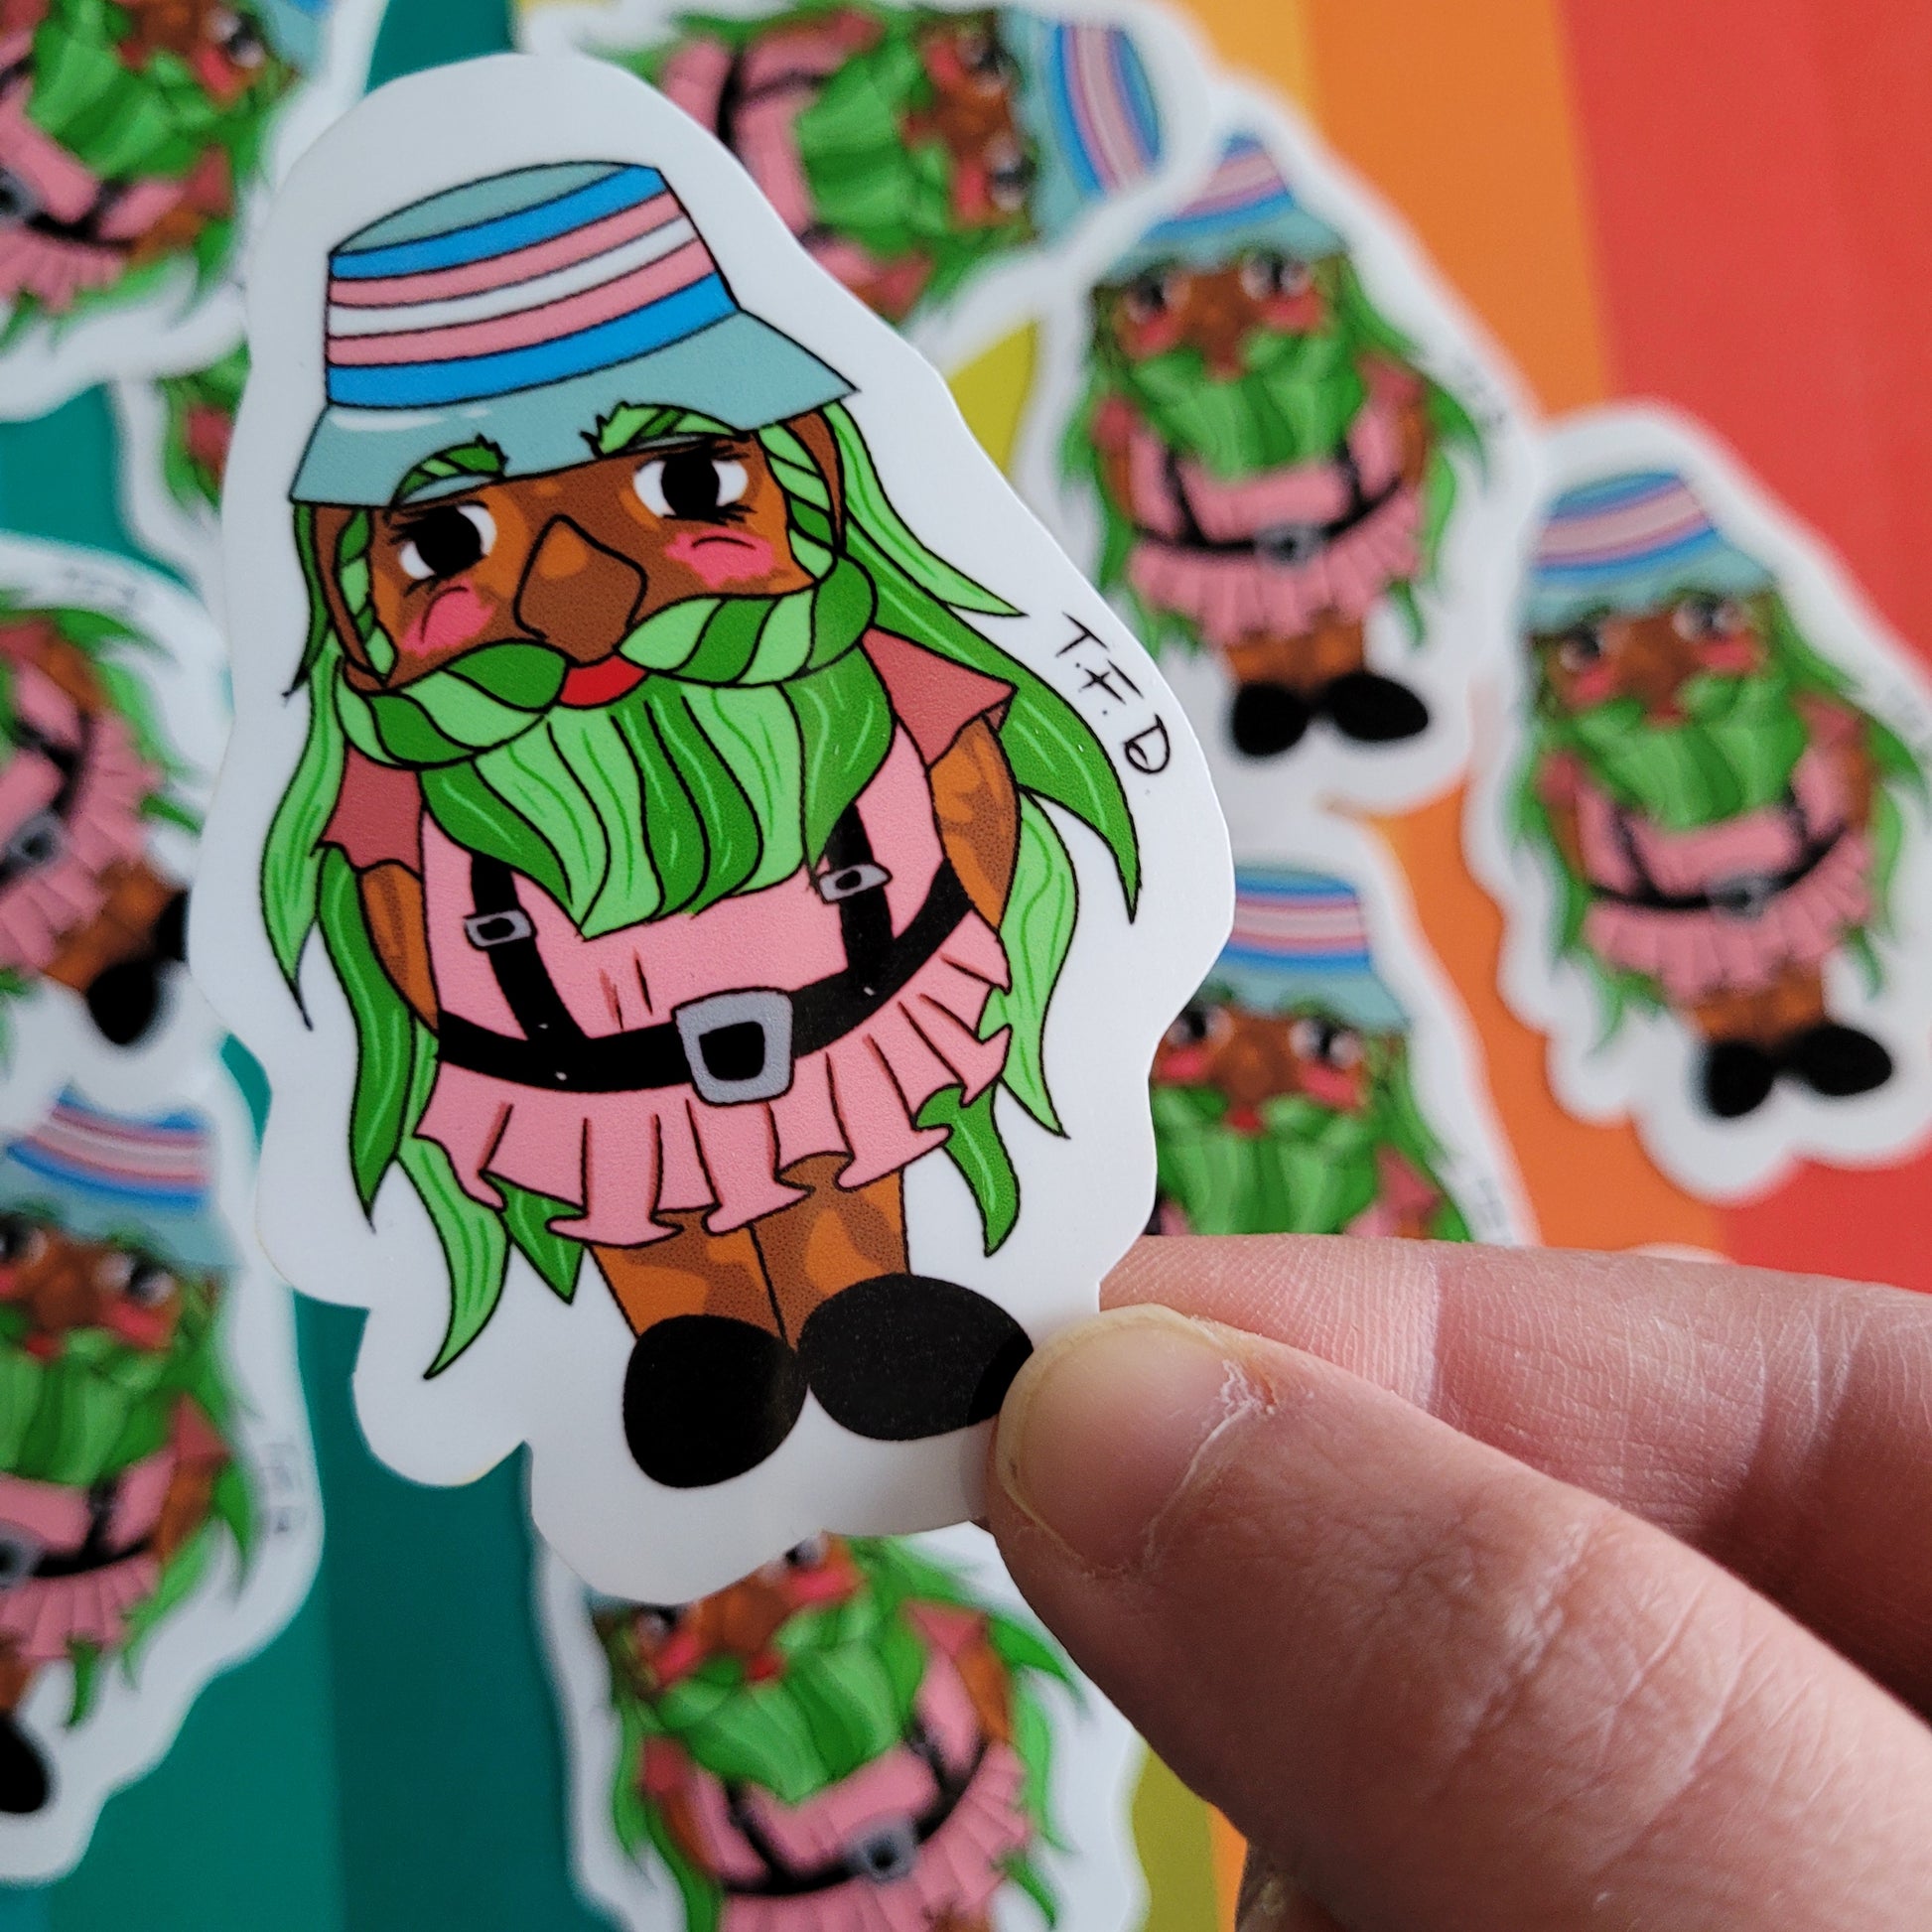 trans gnome sticker between fingers